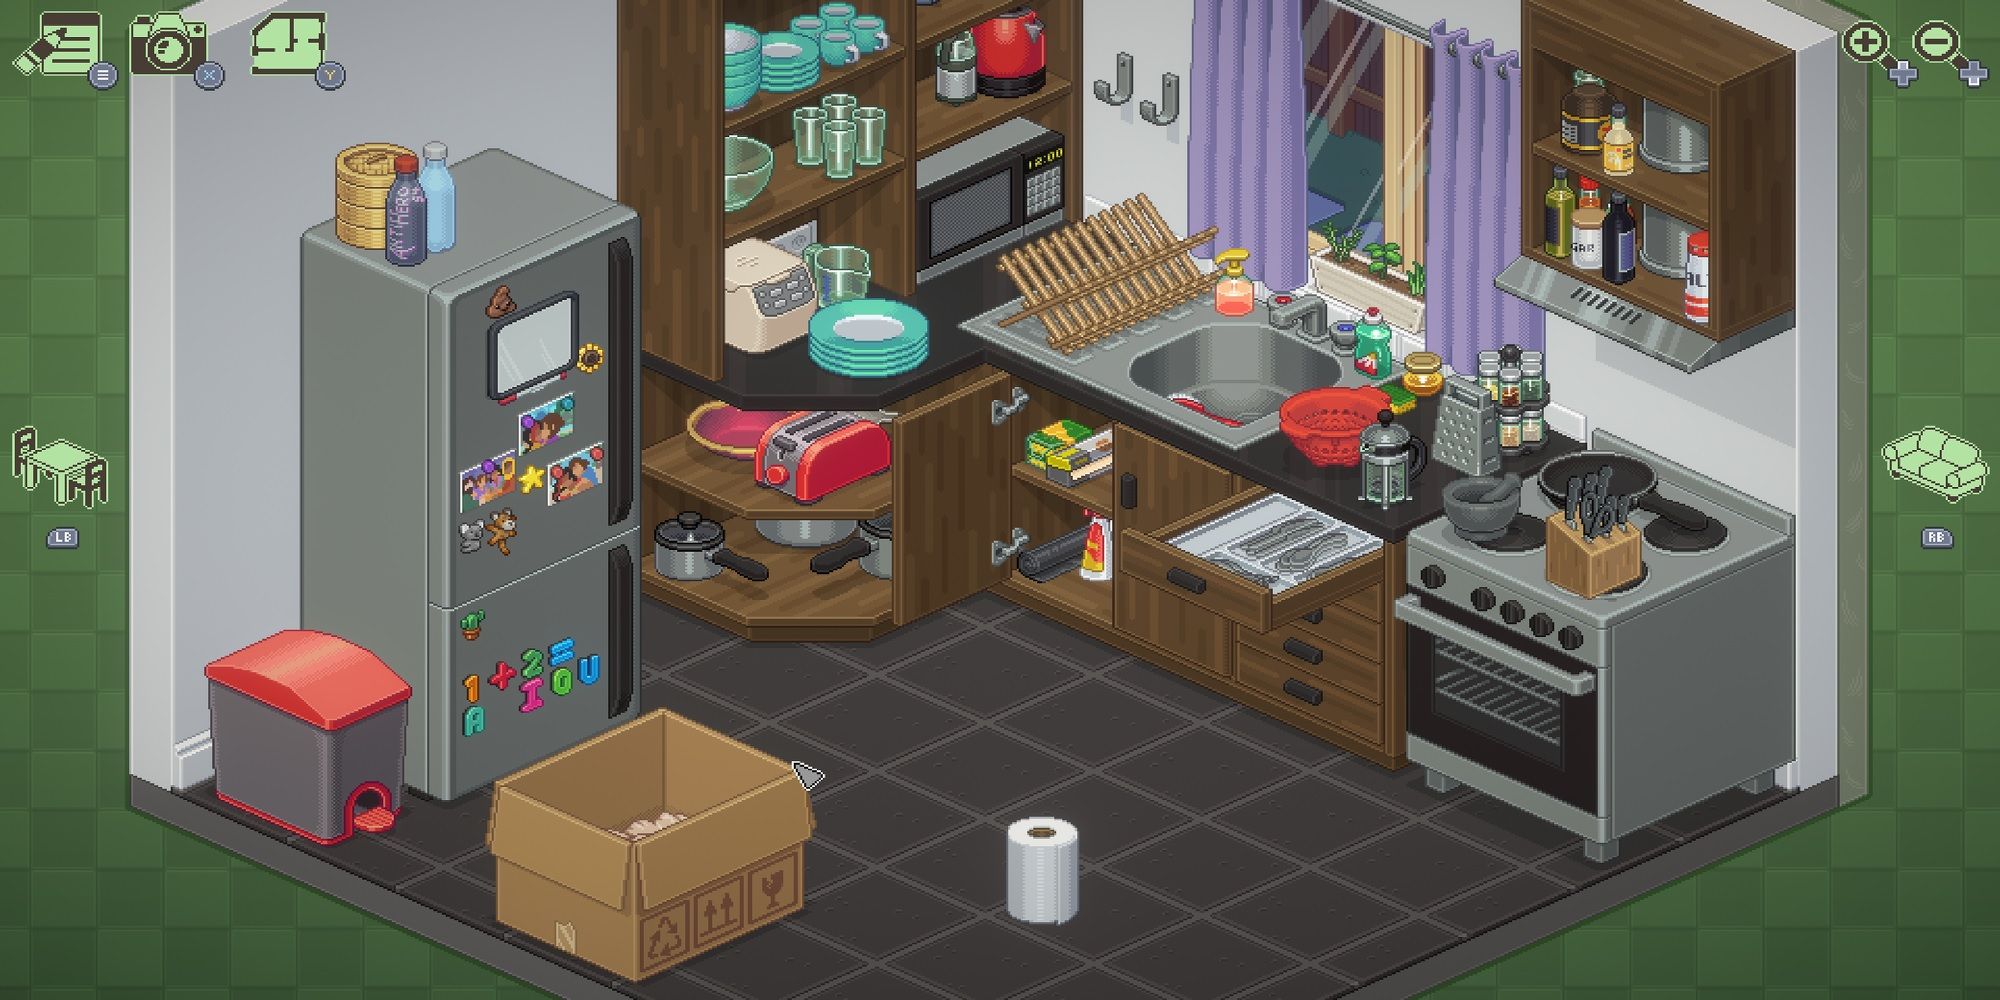 A kitchen from the game Unpacking.